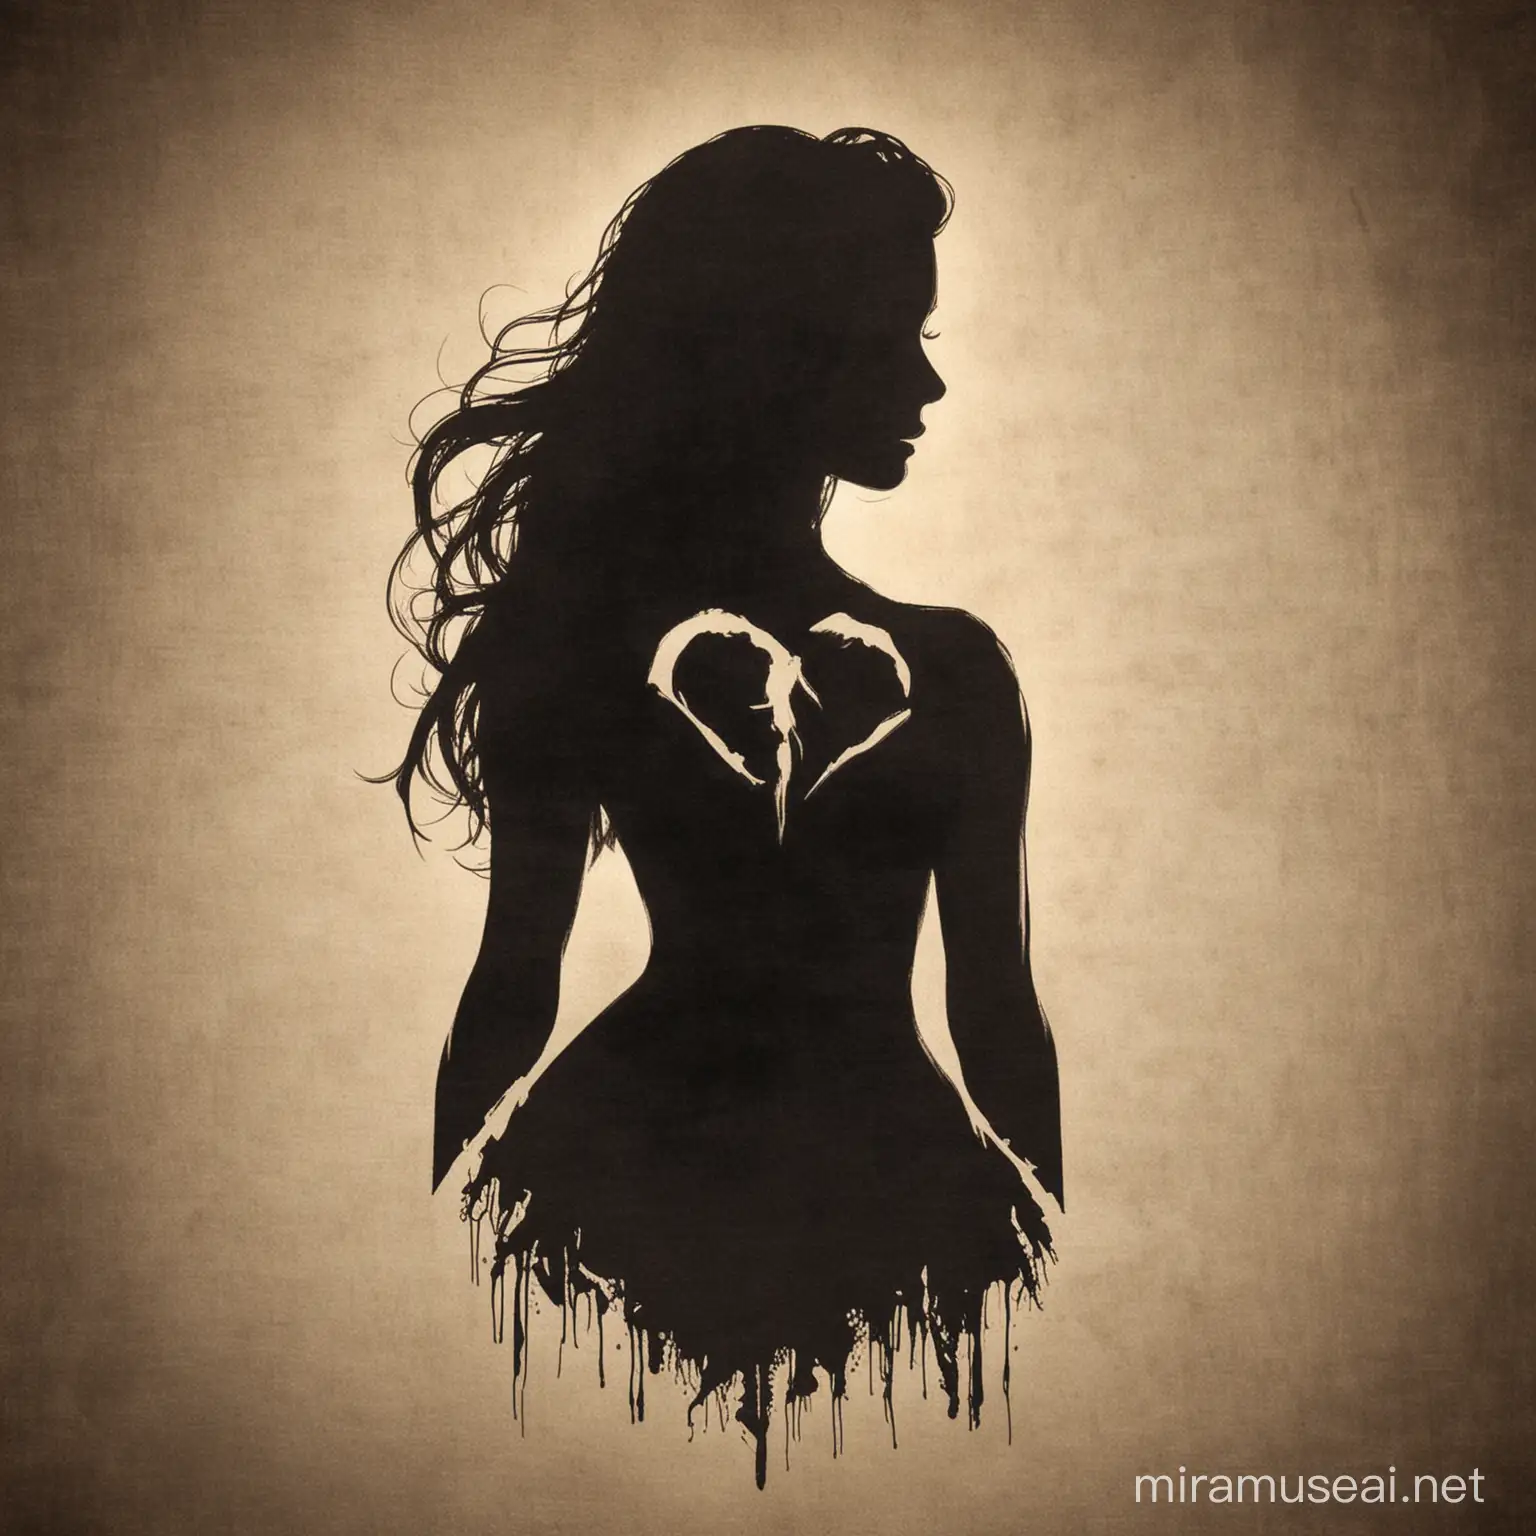 Make a silhouette of a women and inside of her is the symbol of power
